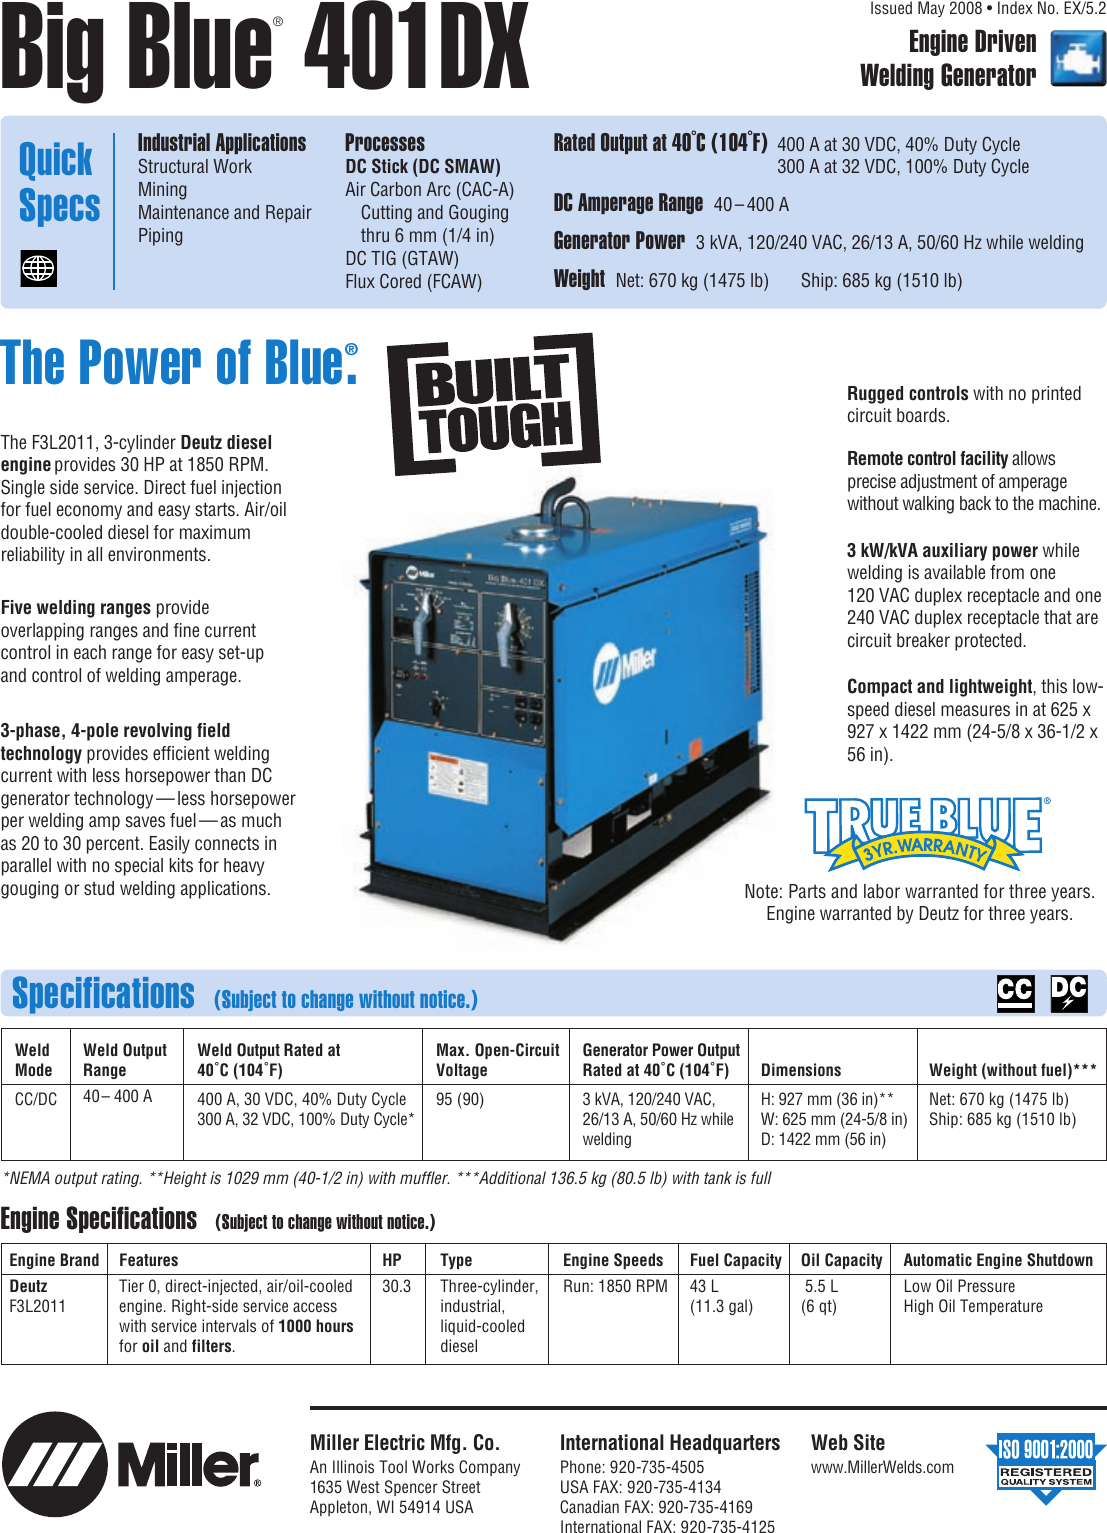 Page 1 of 4 - Miller-Electric Miller-Electric-Big-Blue-401Dx-Users-Manual- A EX5-2 Big Blue 401DX  Miller-electric-big-blue-401dx-users-manual